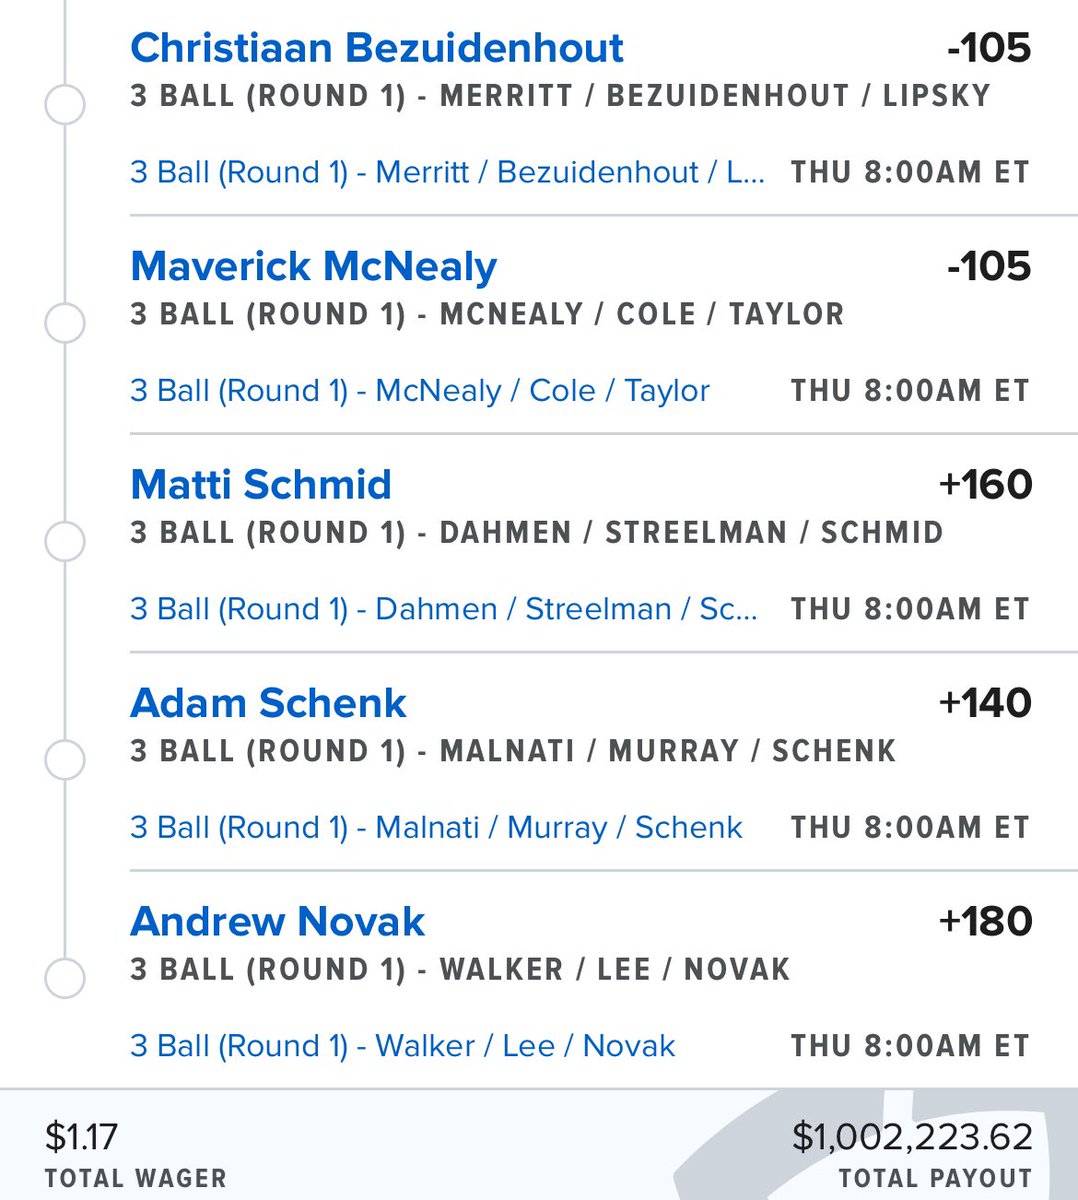 Good News! I figured out the easiest way to steal $1,000,000 from FanDuel tomorrow…

And it only cost $1.17 to play ⛳️💰